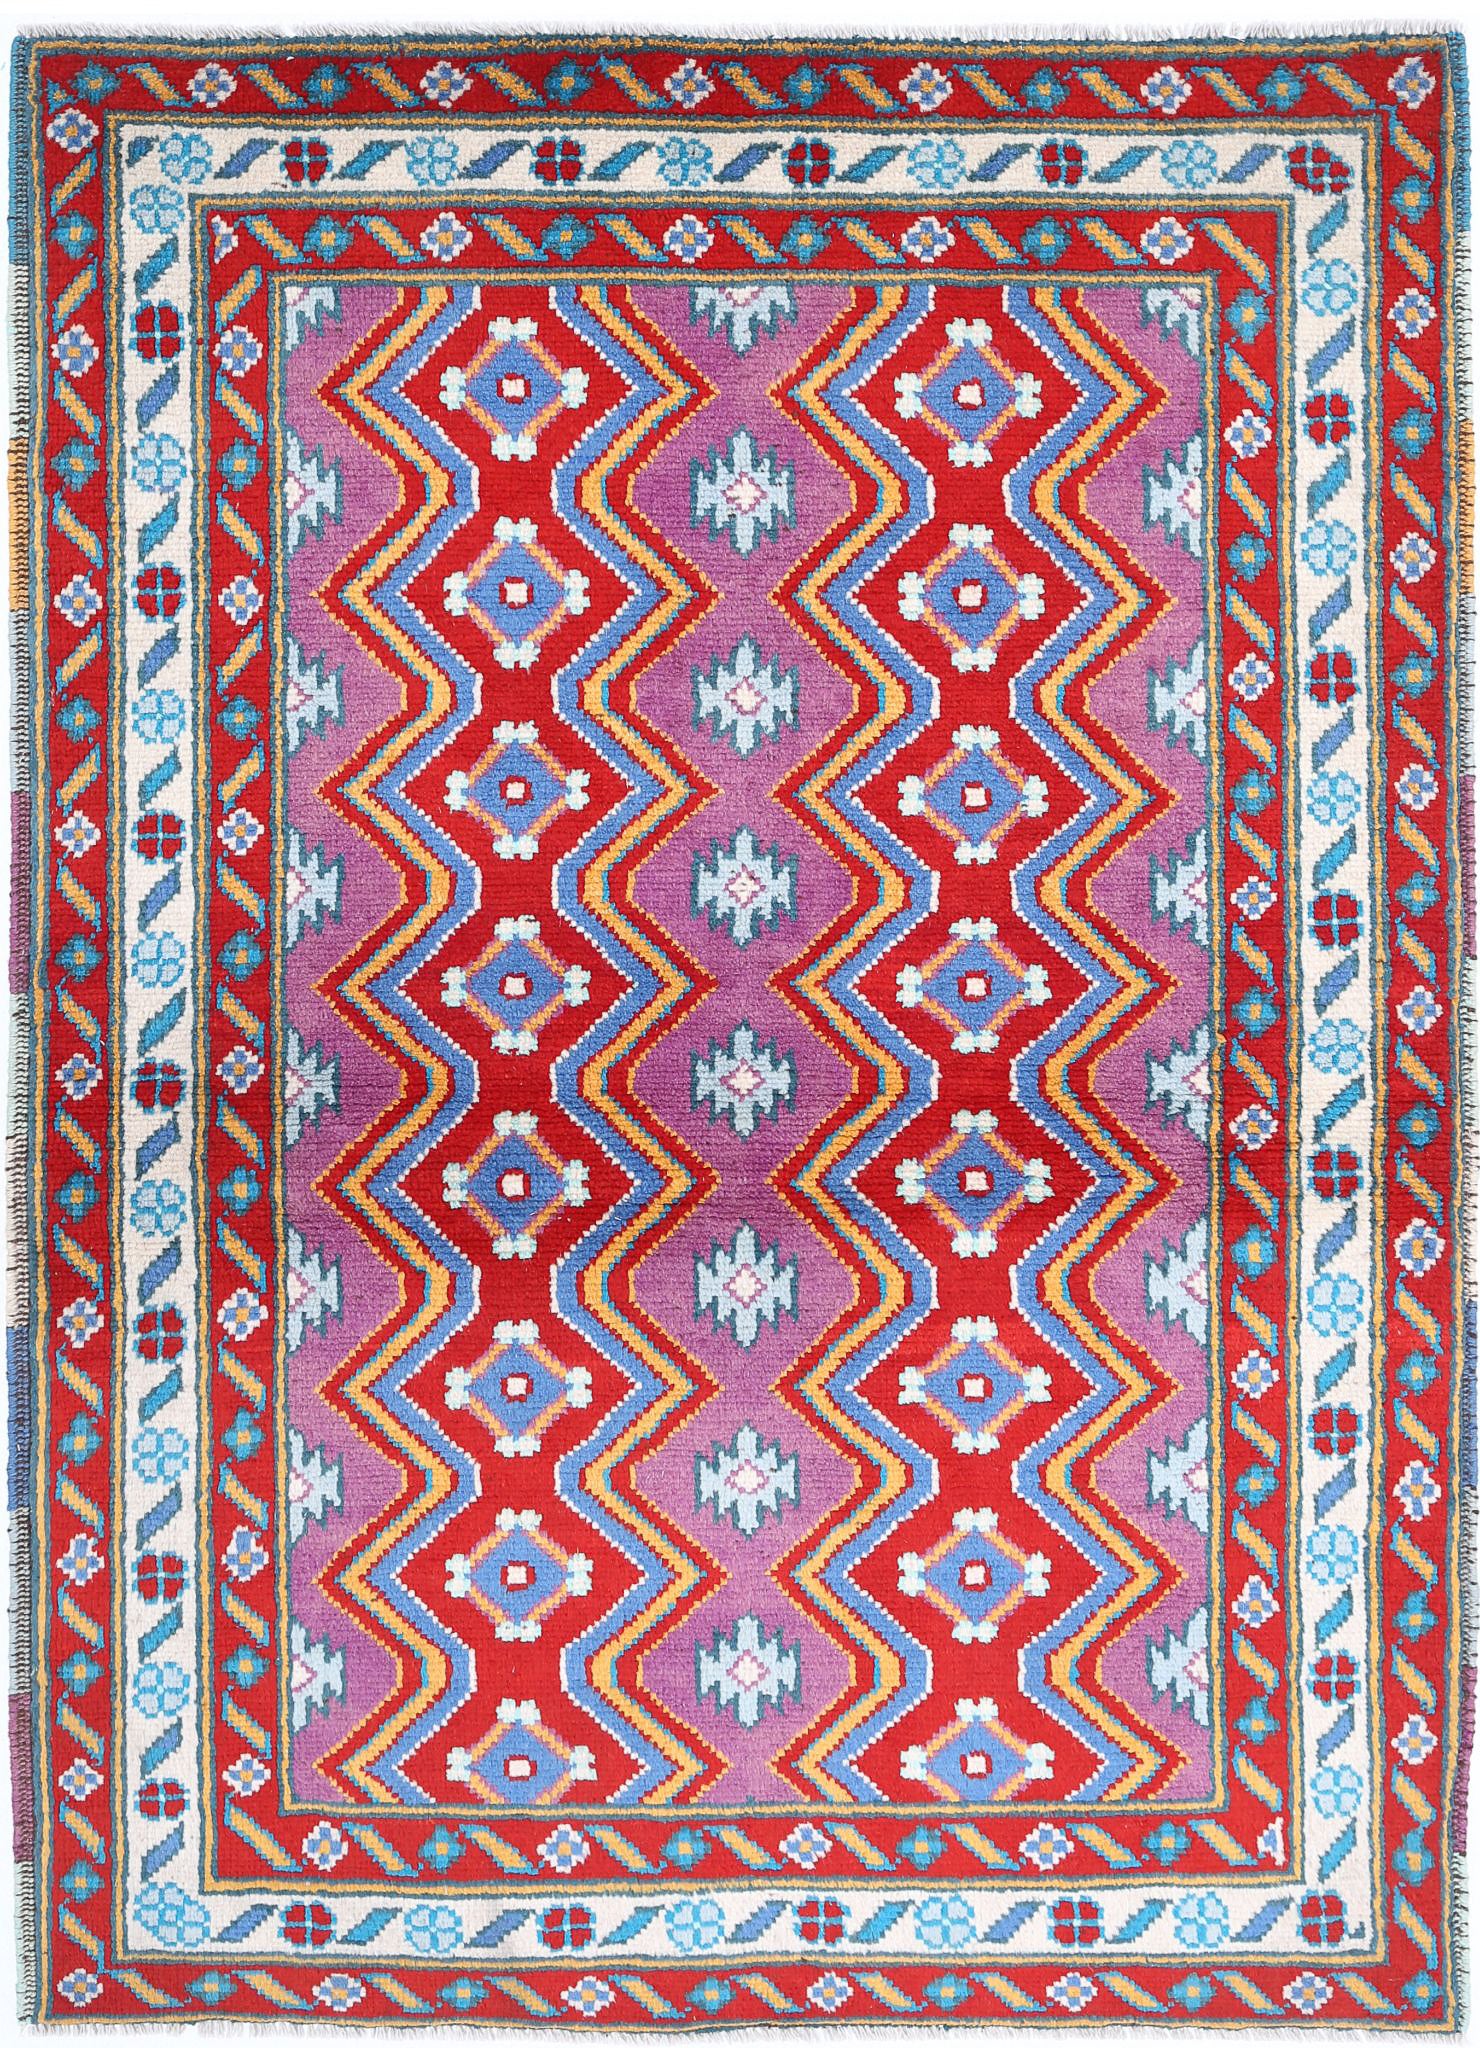 Revival-hand-knotted-qarghani-wool-rug-5014069.jpg